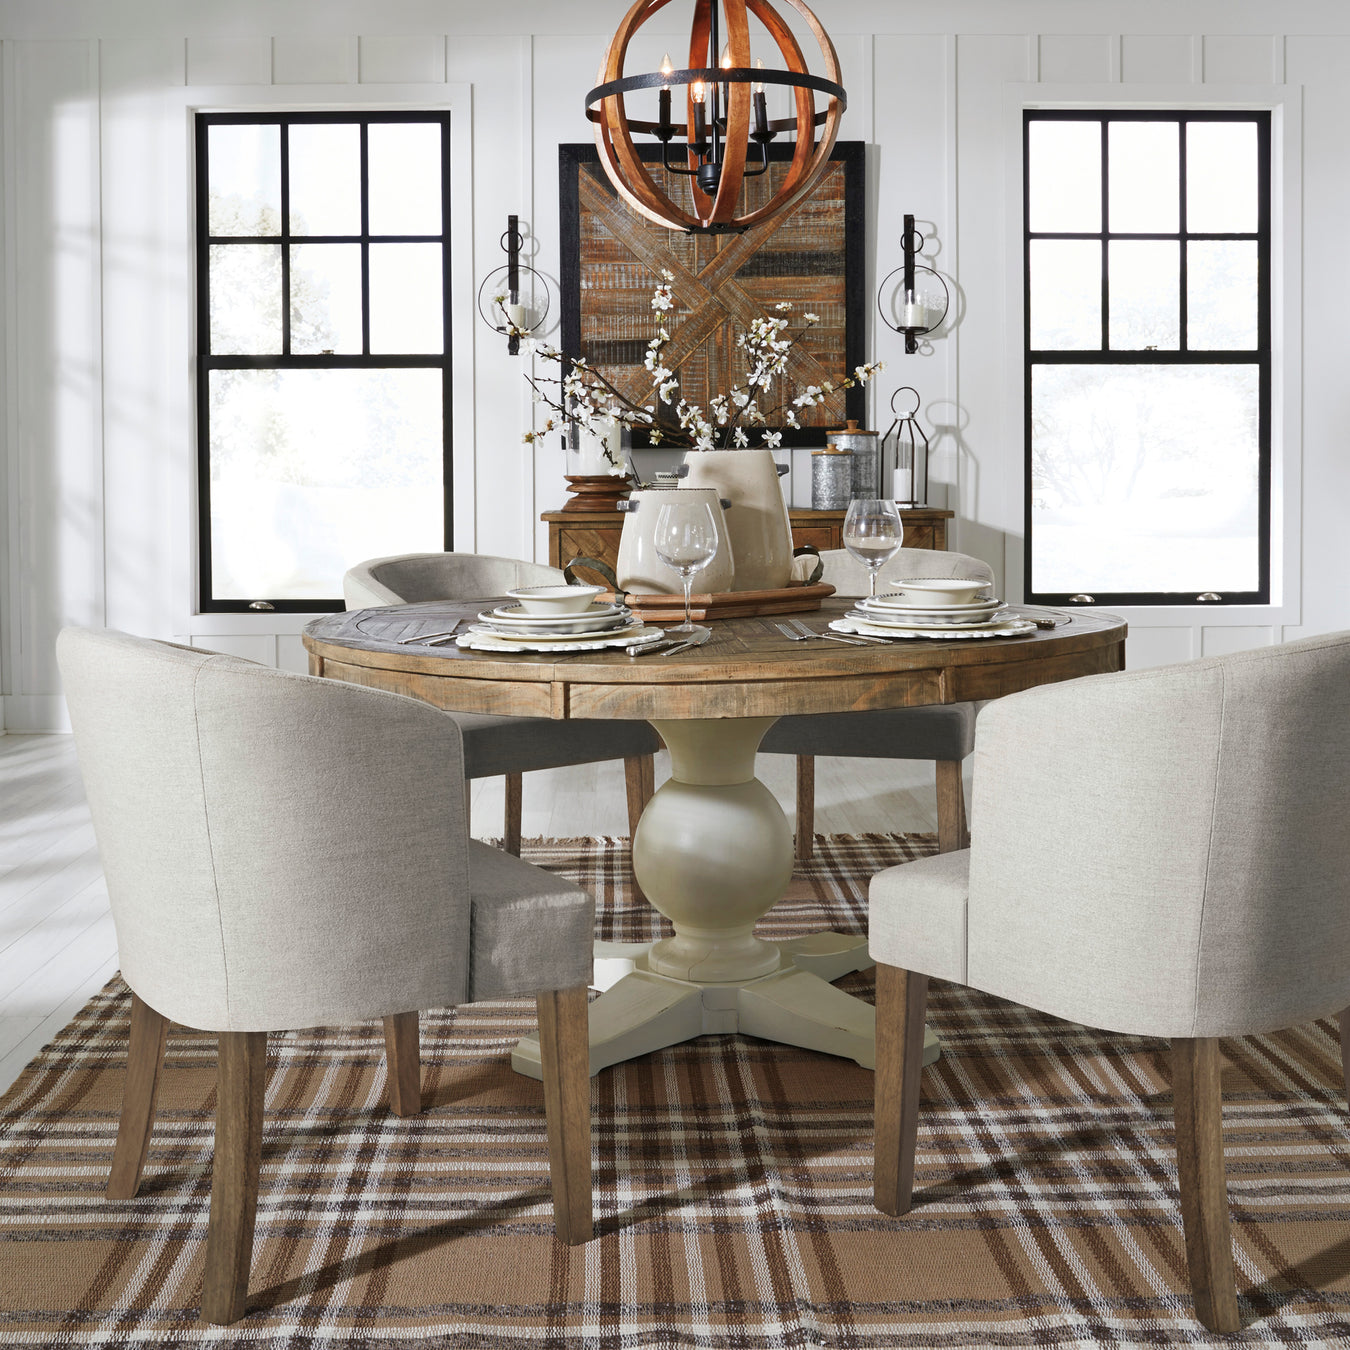 Dining Room Groups